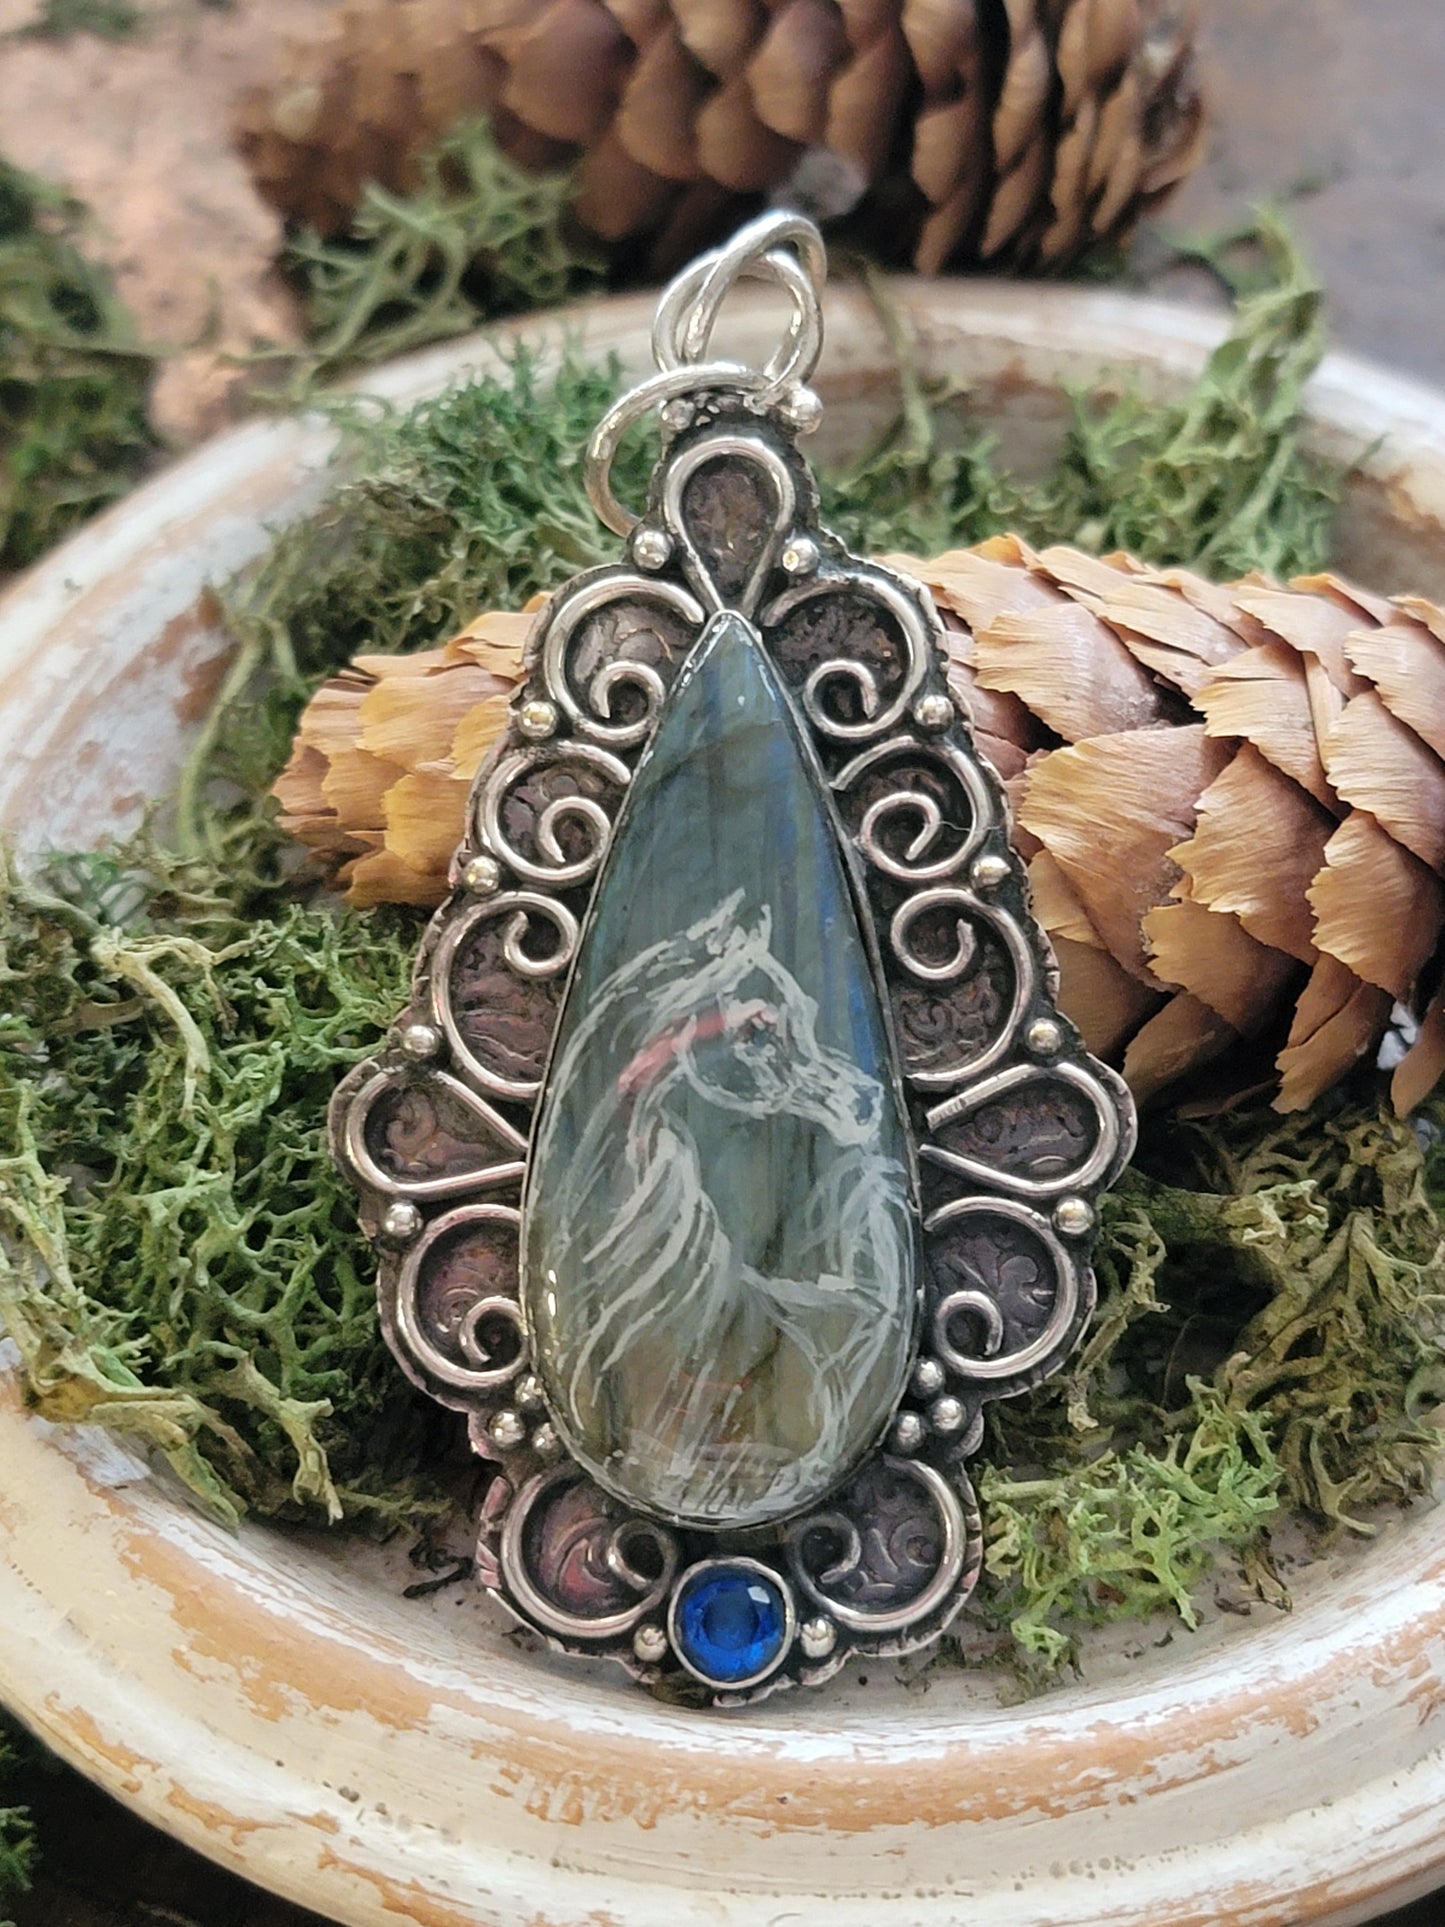 Labrodite pendant with an Arabian horse